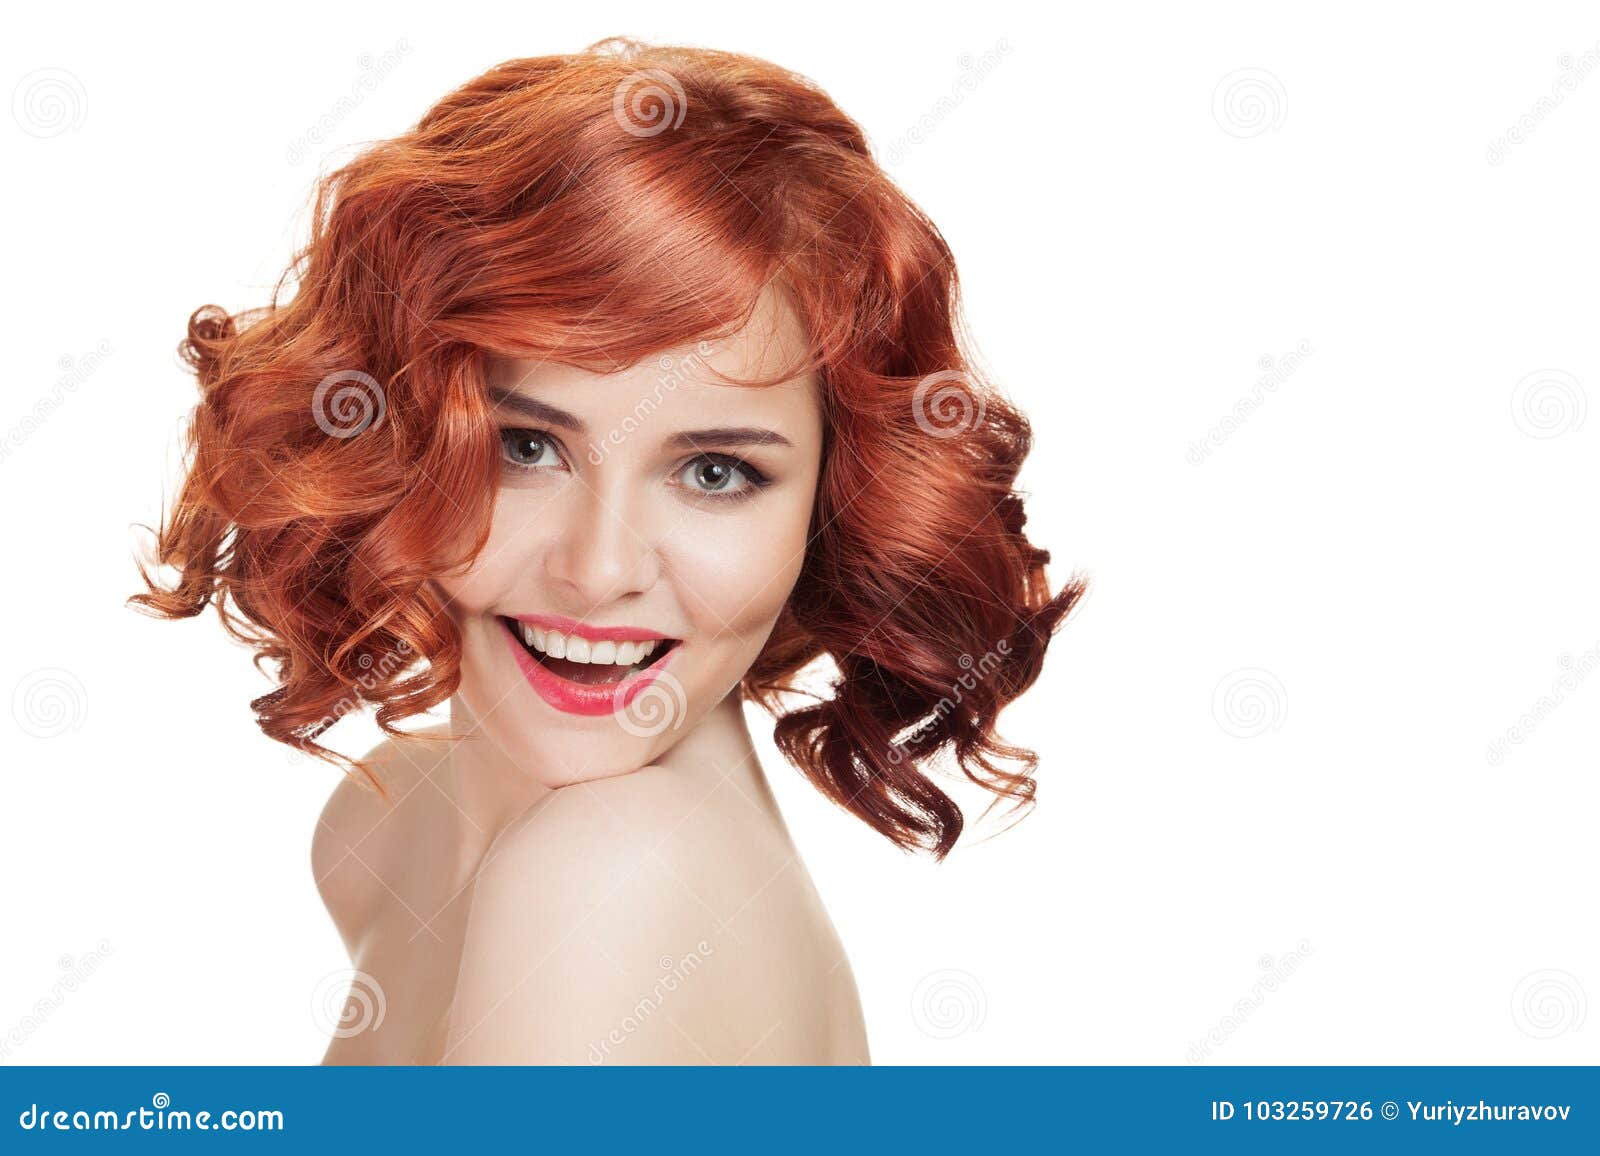 2492632 Red Hair Images, Stock Photos & Vectors